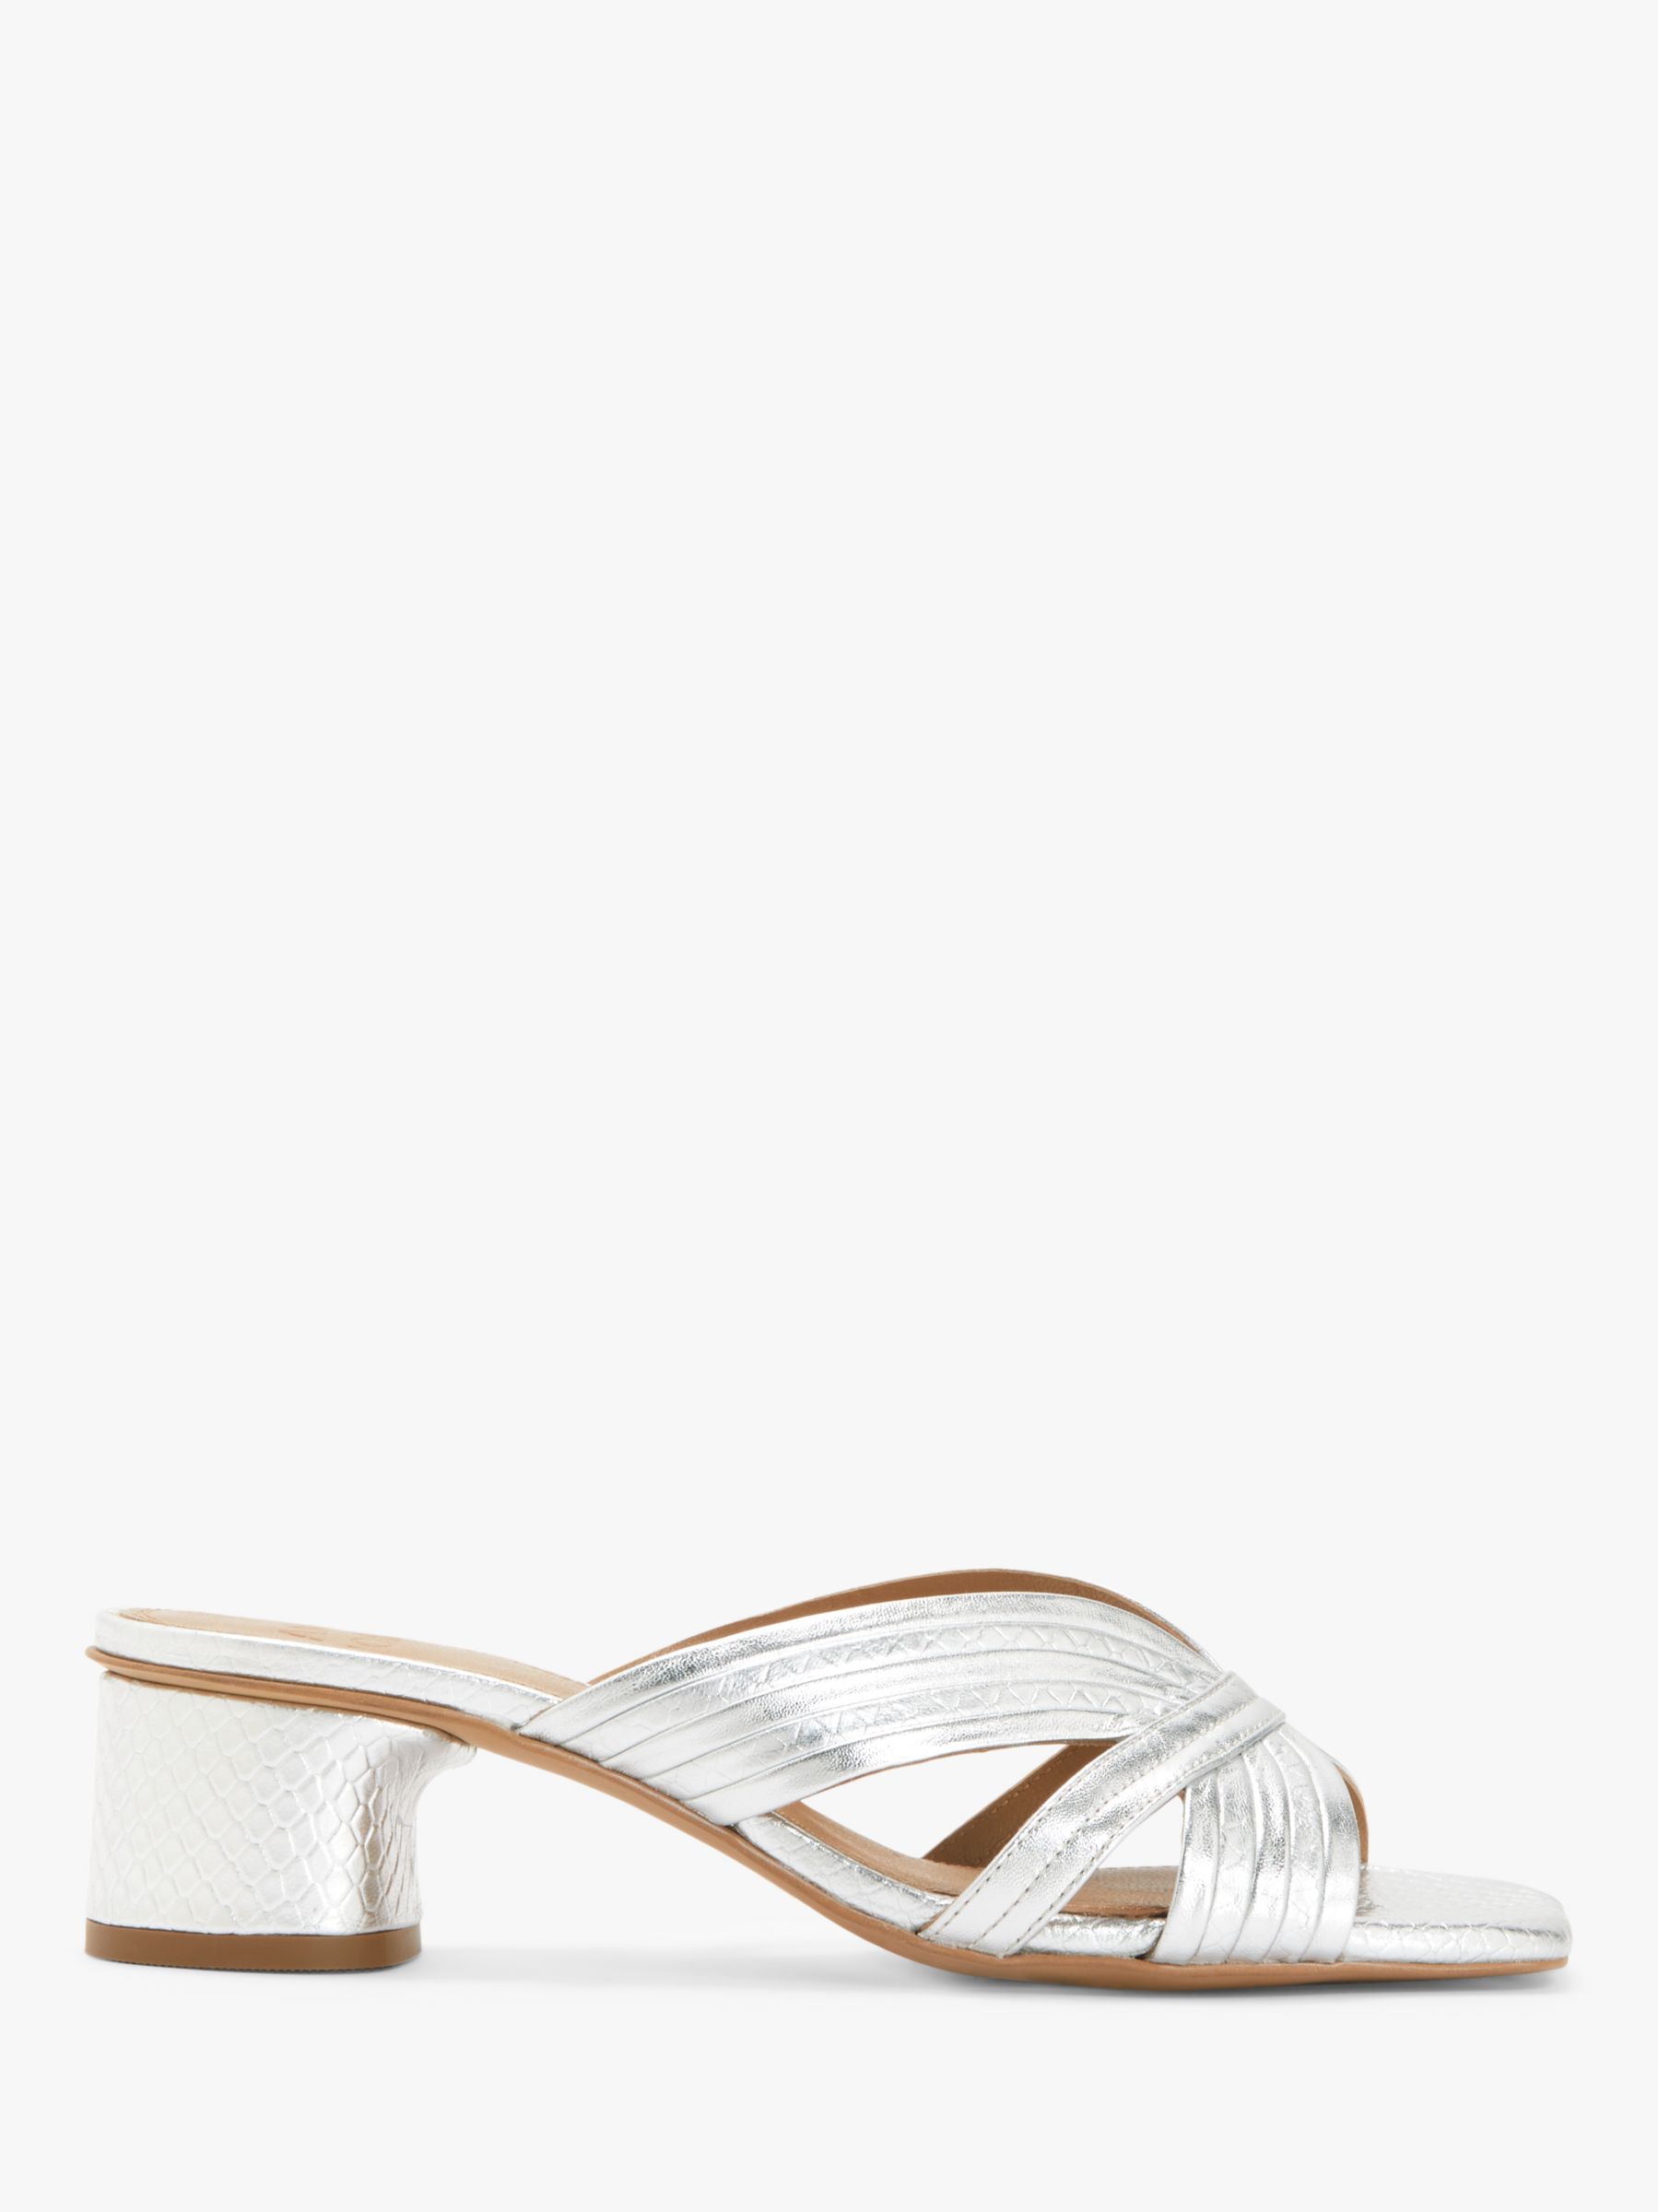 AND/OR Ivorie Leather Multi Strap Block Heel Mule Sandals, Silver at ...